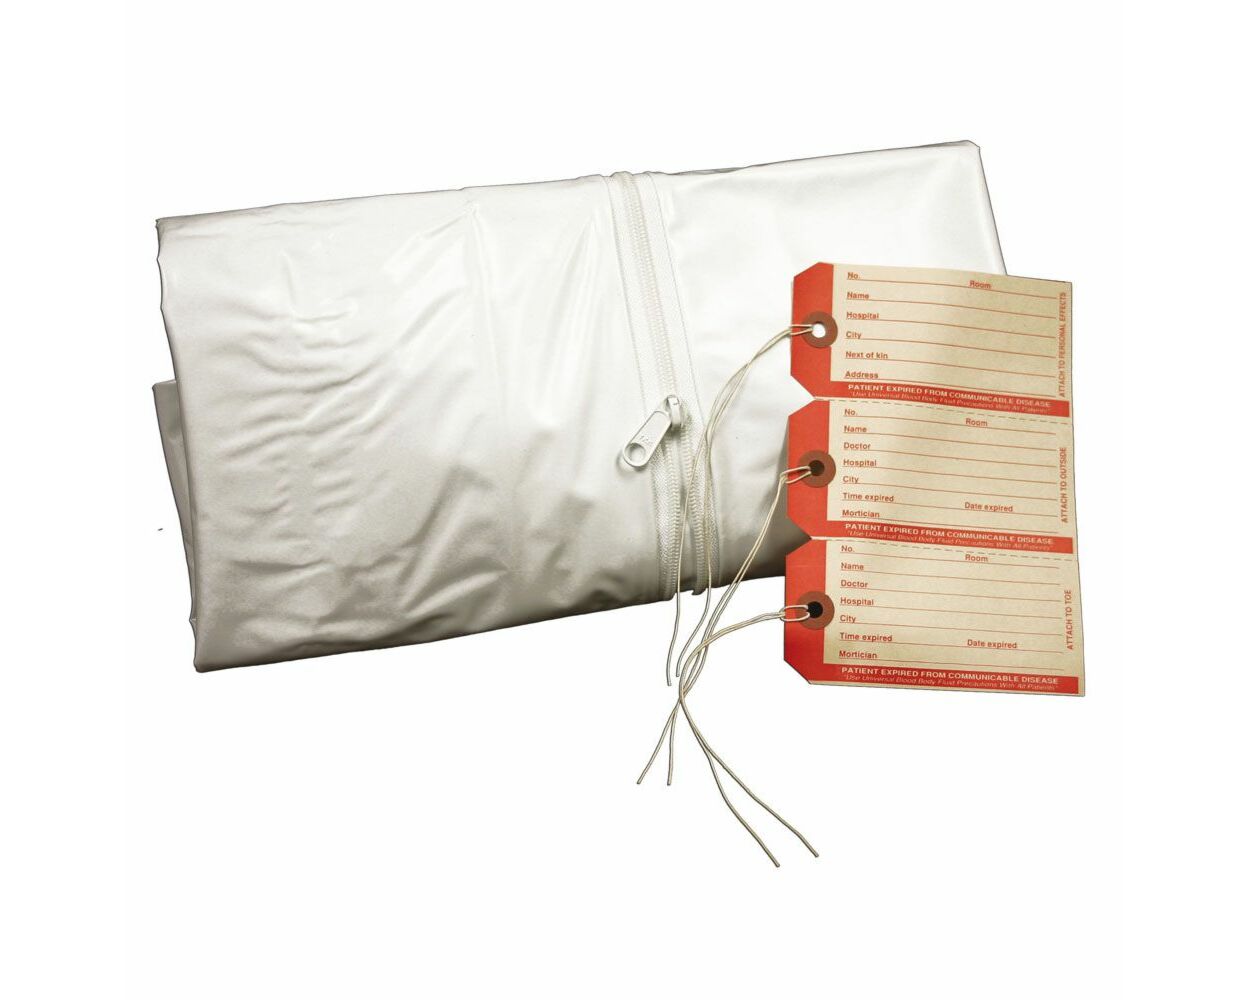 Shroud Kits & Cadaver Bags Products, Supplies and Equipment